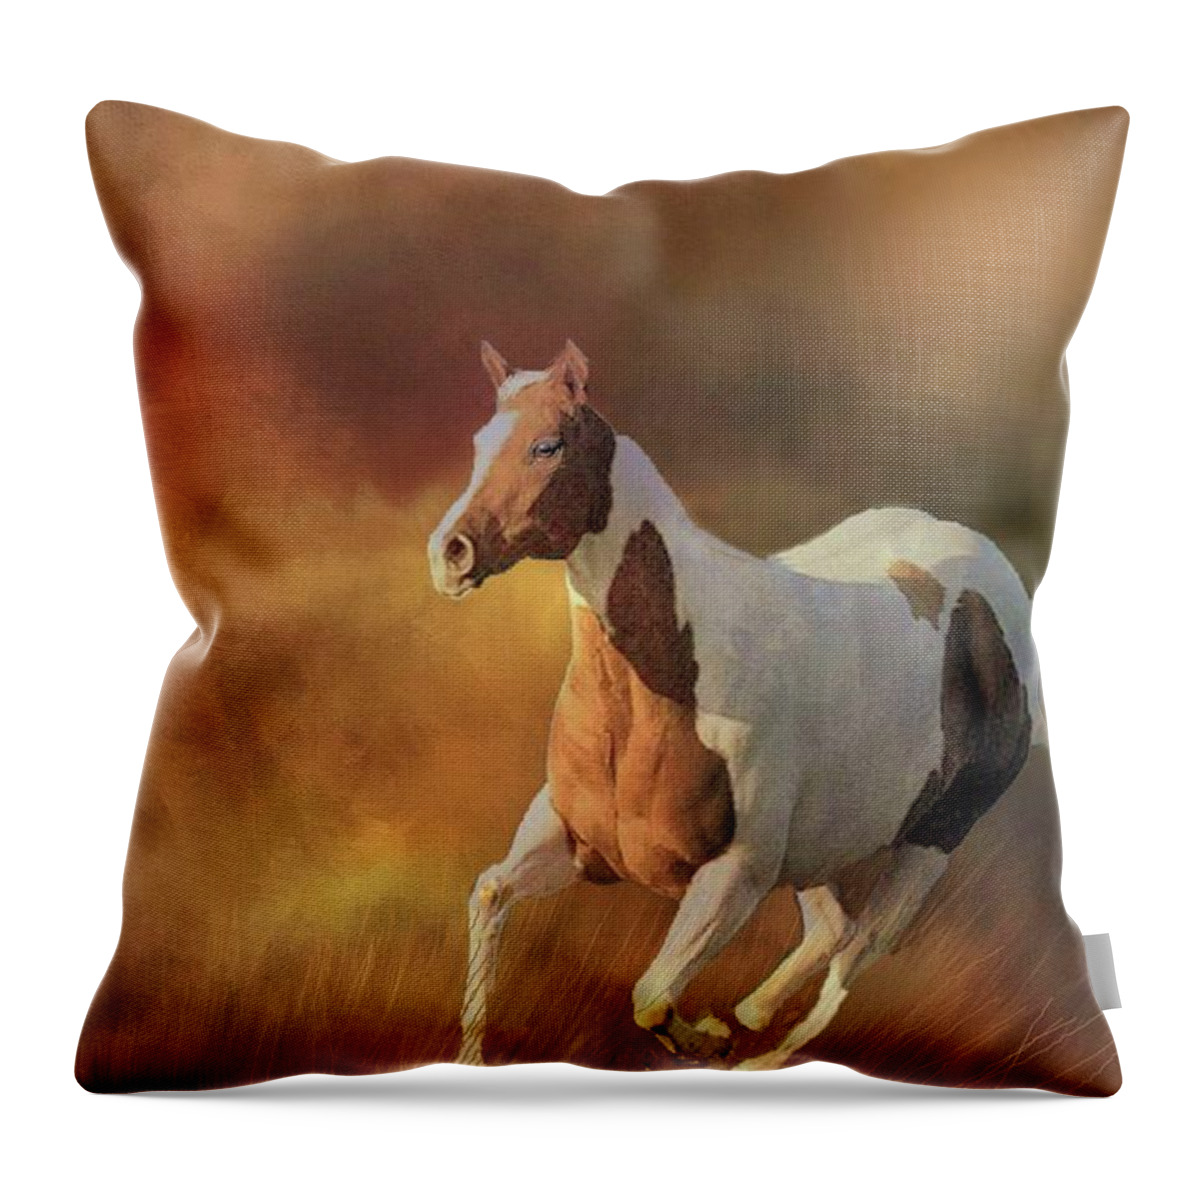 Pinto Throw Pillow featuring the photograph Running Wild by Janette Boyd